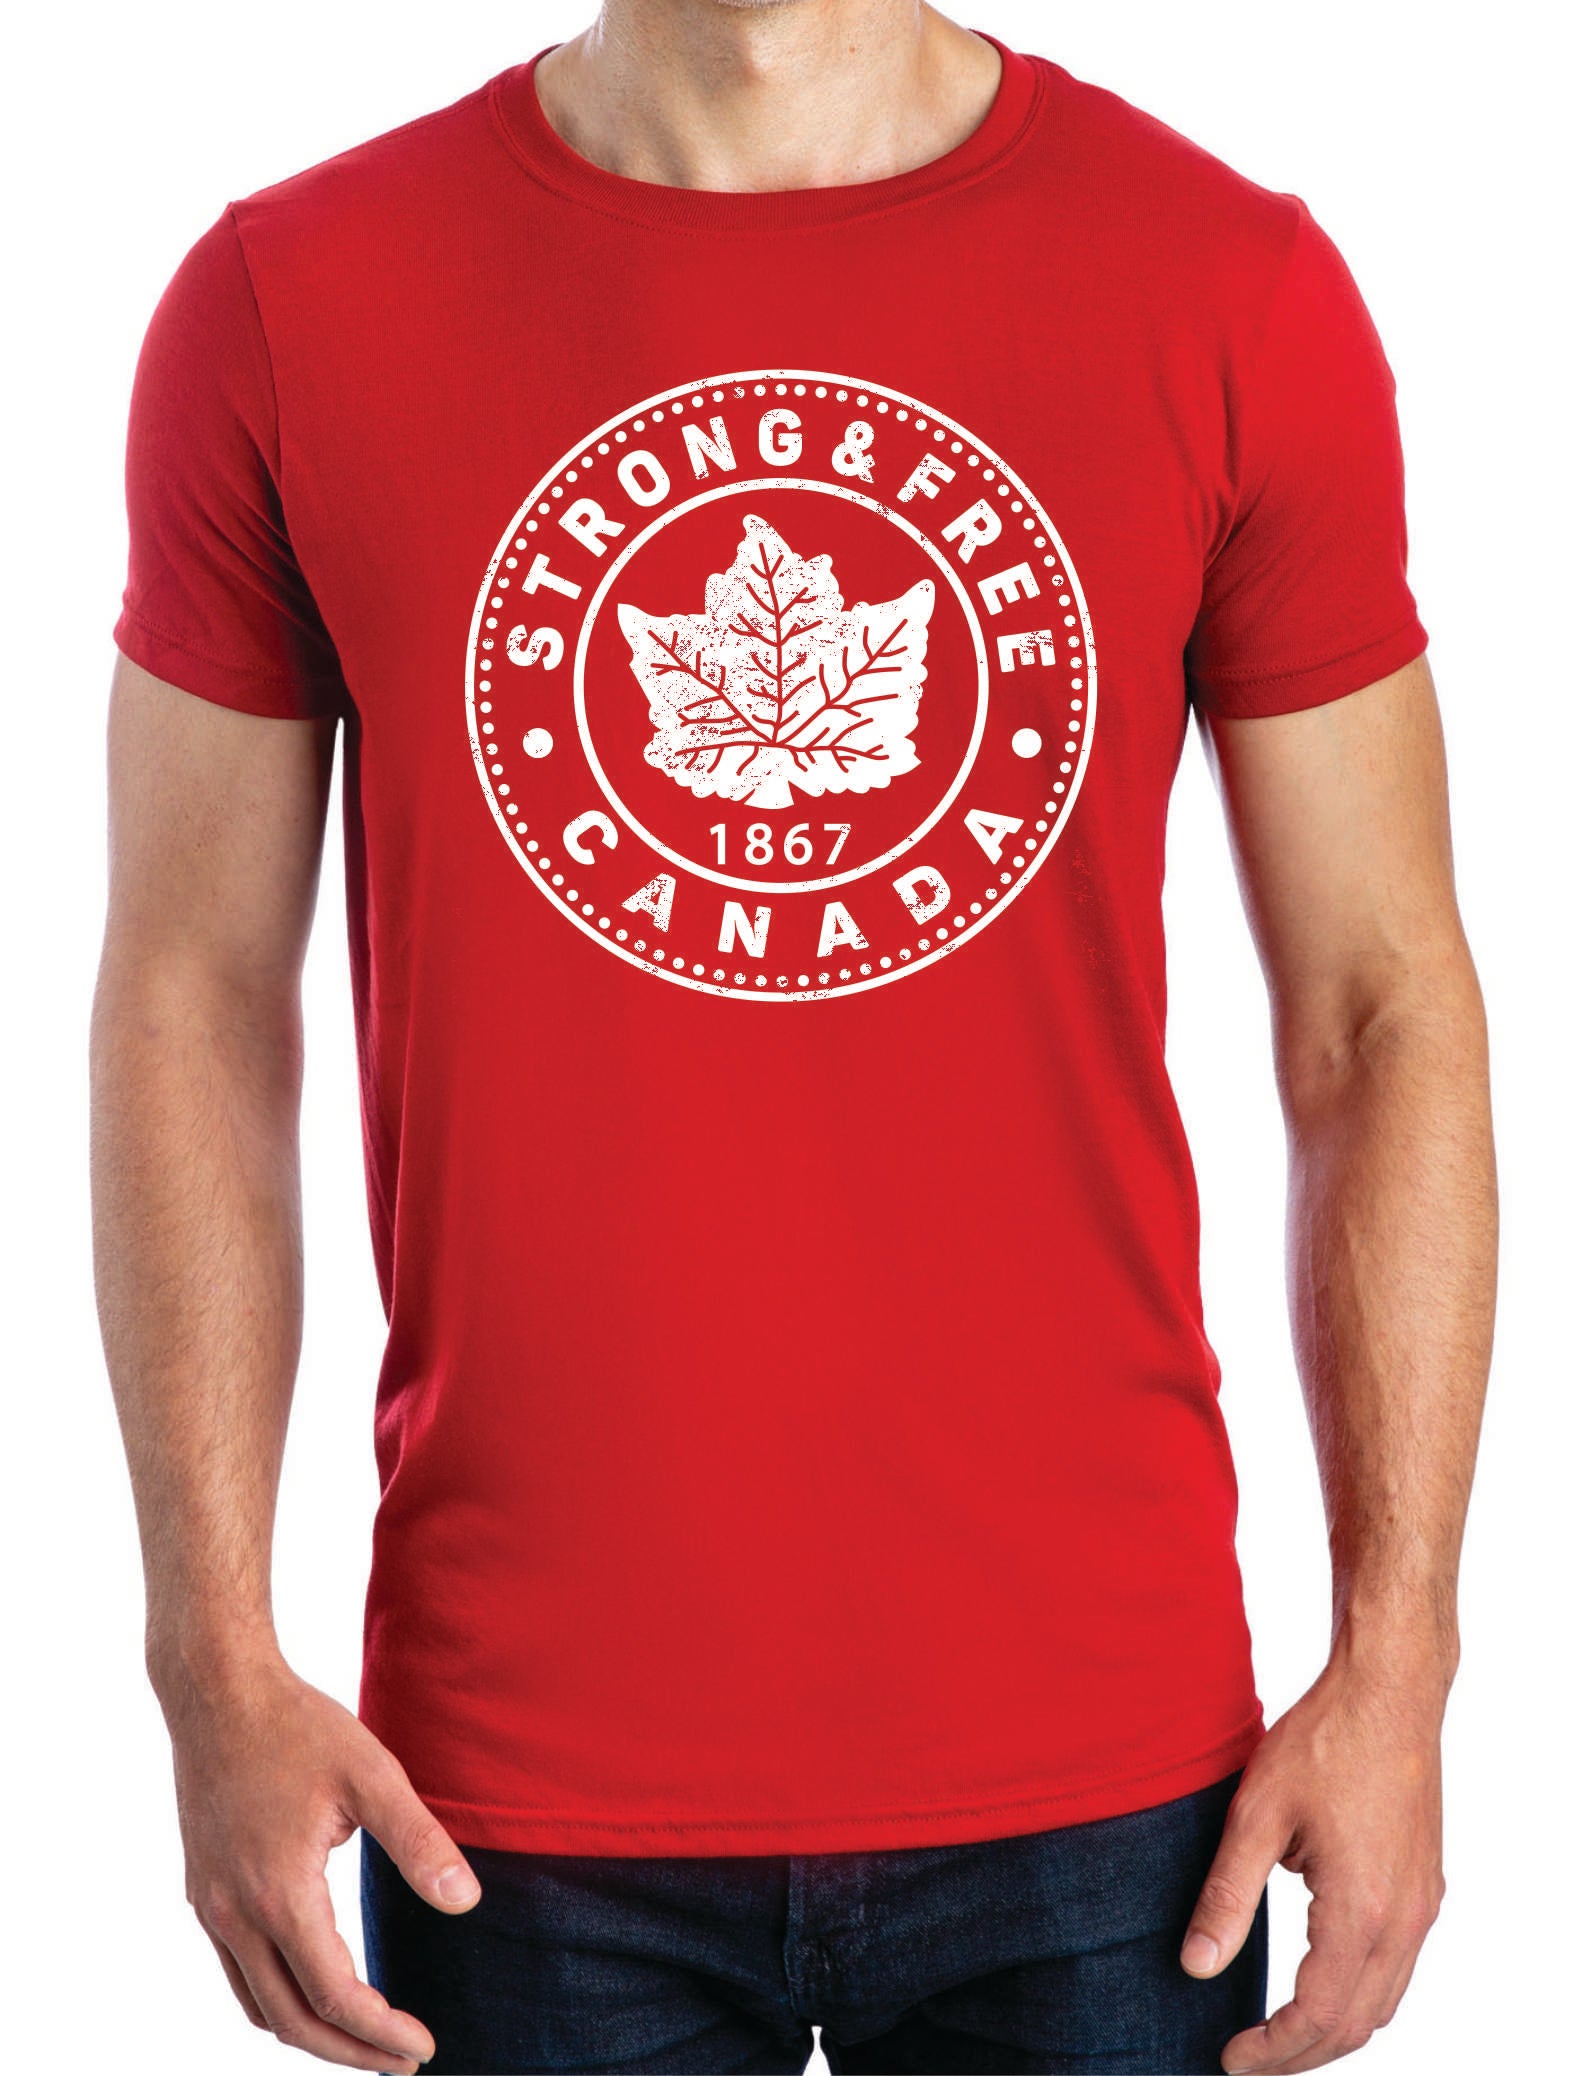 Men's T-Shirt Strong Free™ (Classic Red) | Stanfields.com